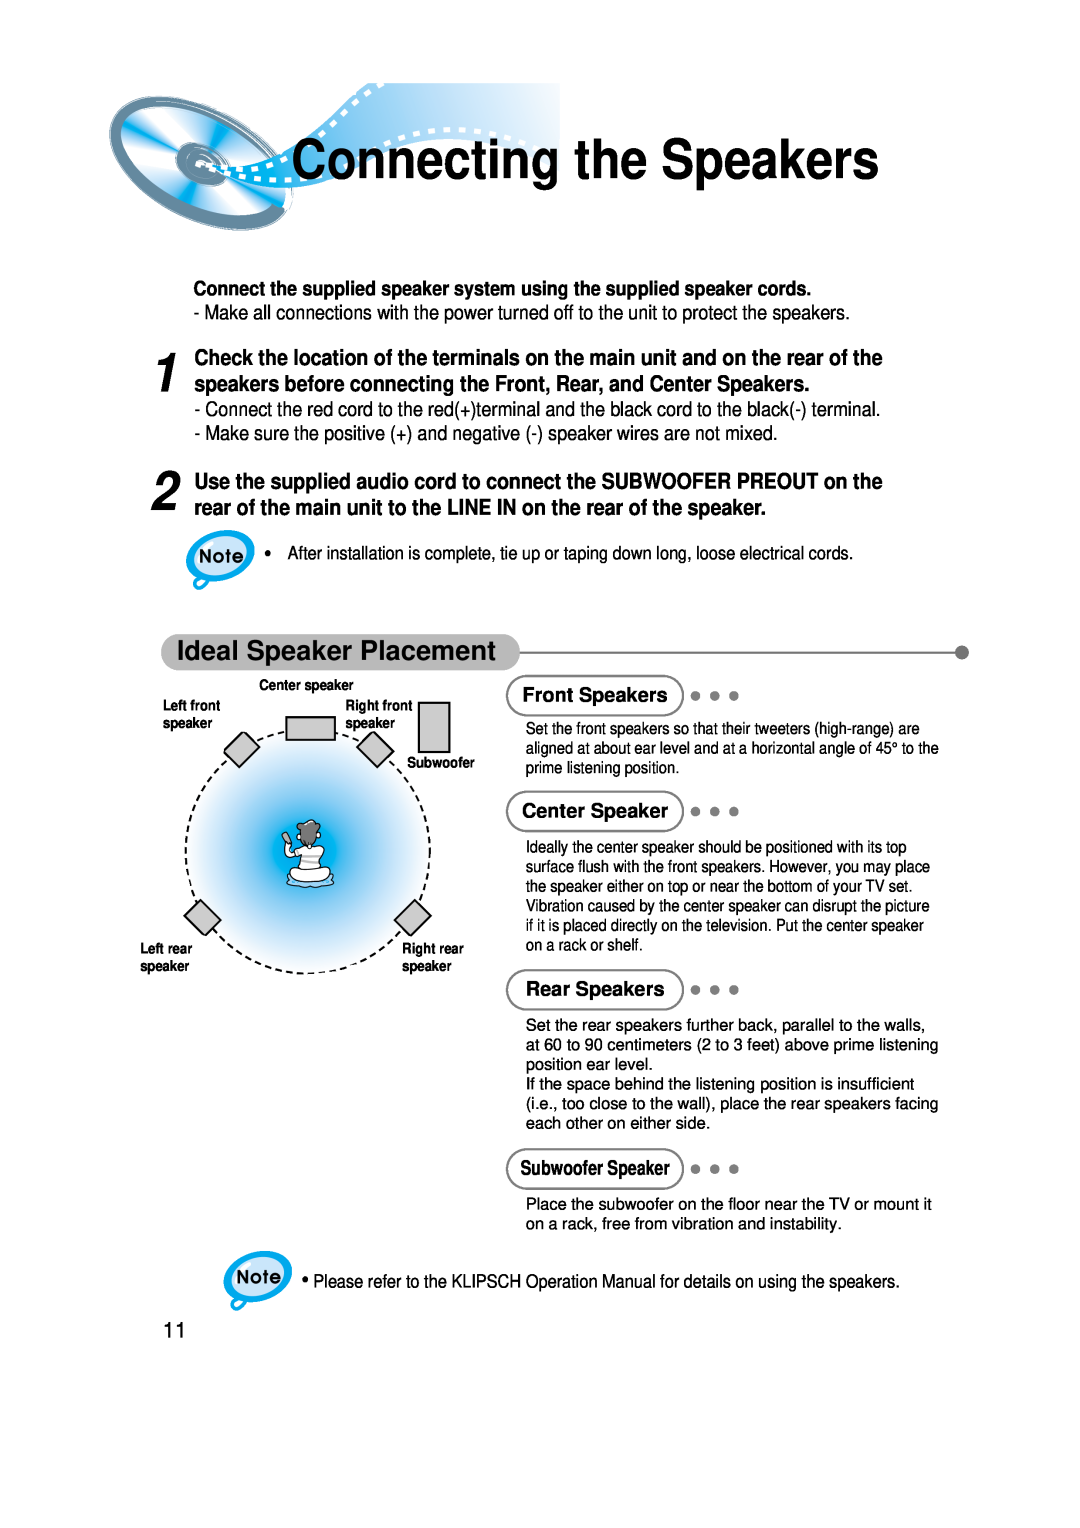 Samsung HT-SK6 instruction manual Connecting the Speakers, Ideal Speaker Placement 